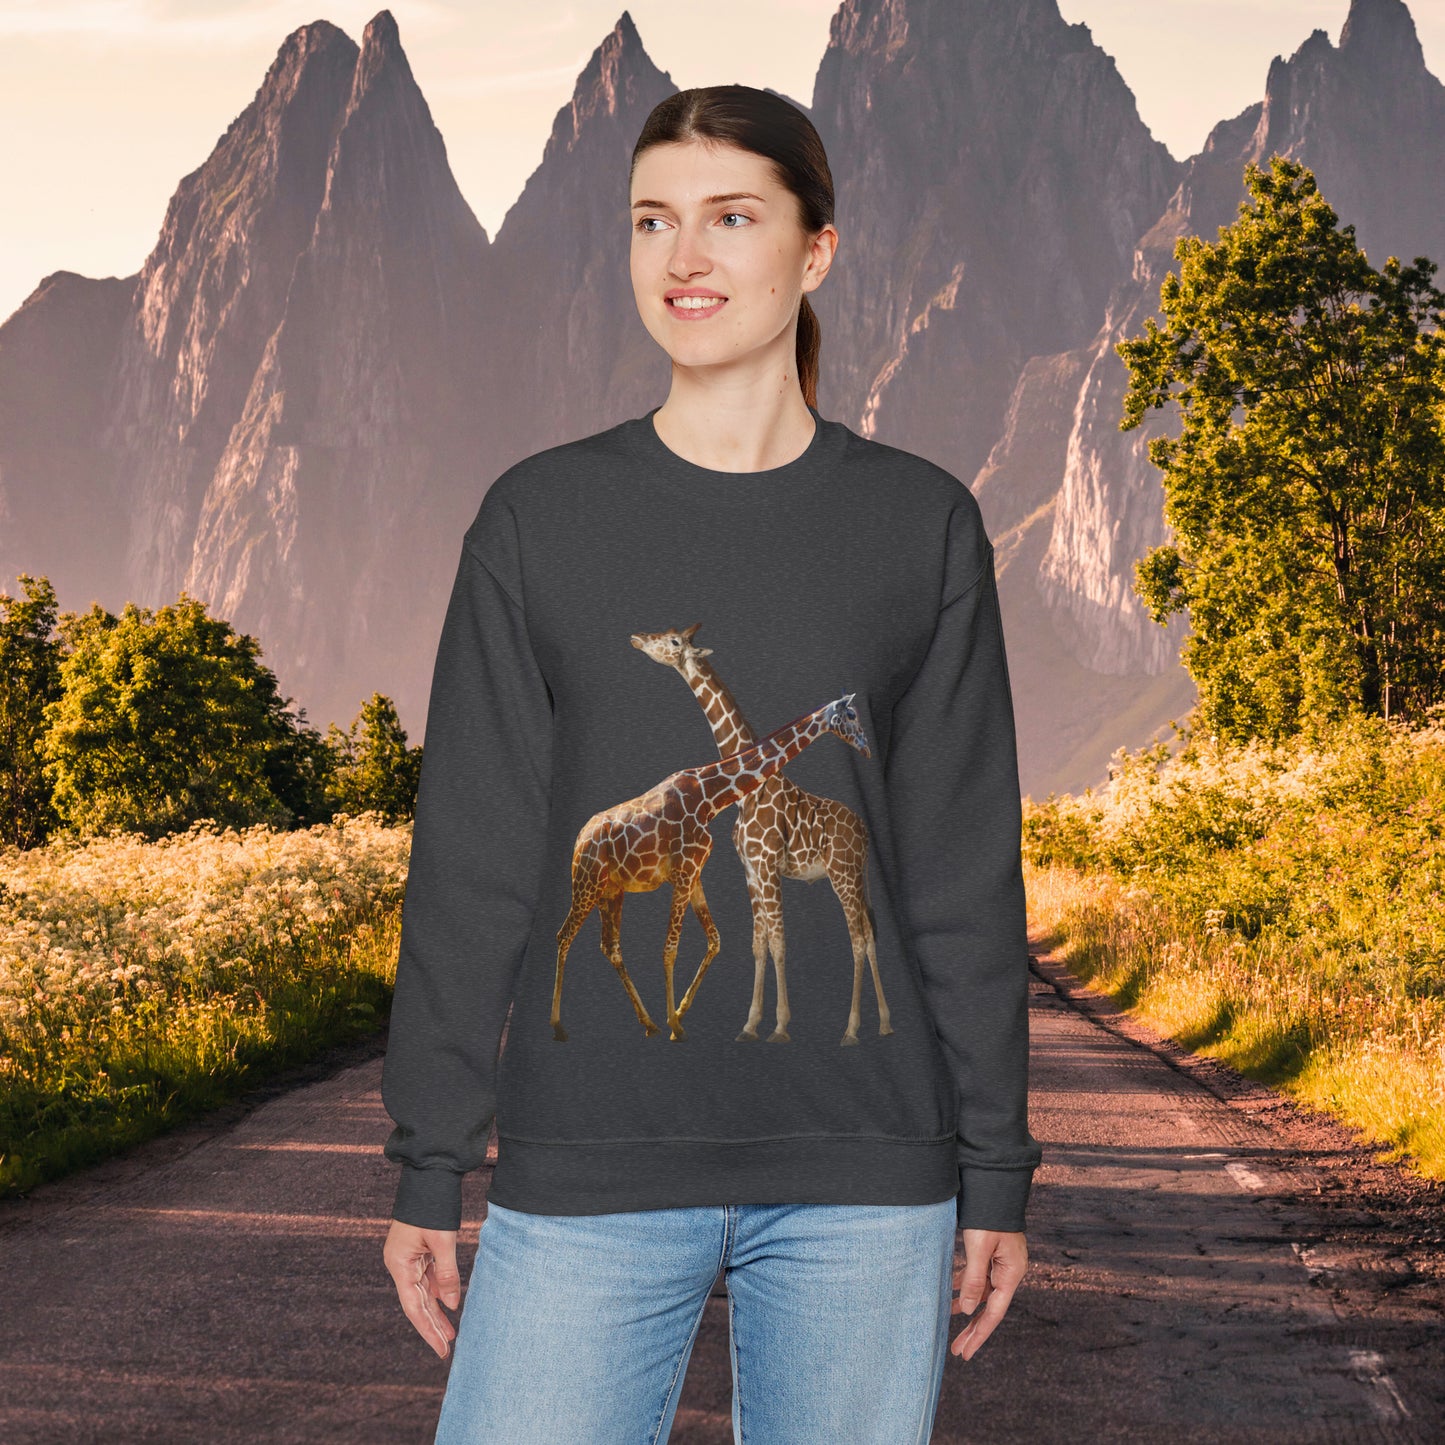 Love giraffes? Well here’s the sweatshirt for you! Give the gift of this Unisex Heavy Blend™ Crewneck Sweatshirt or get one for yourself.